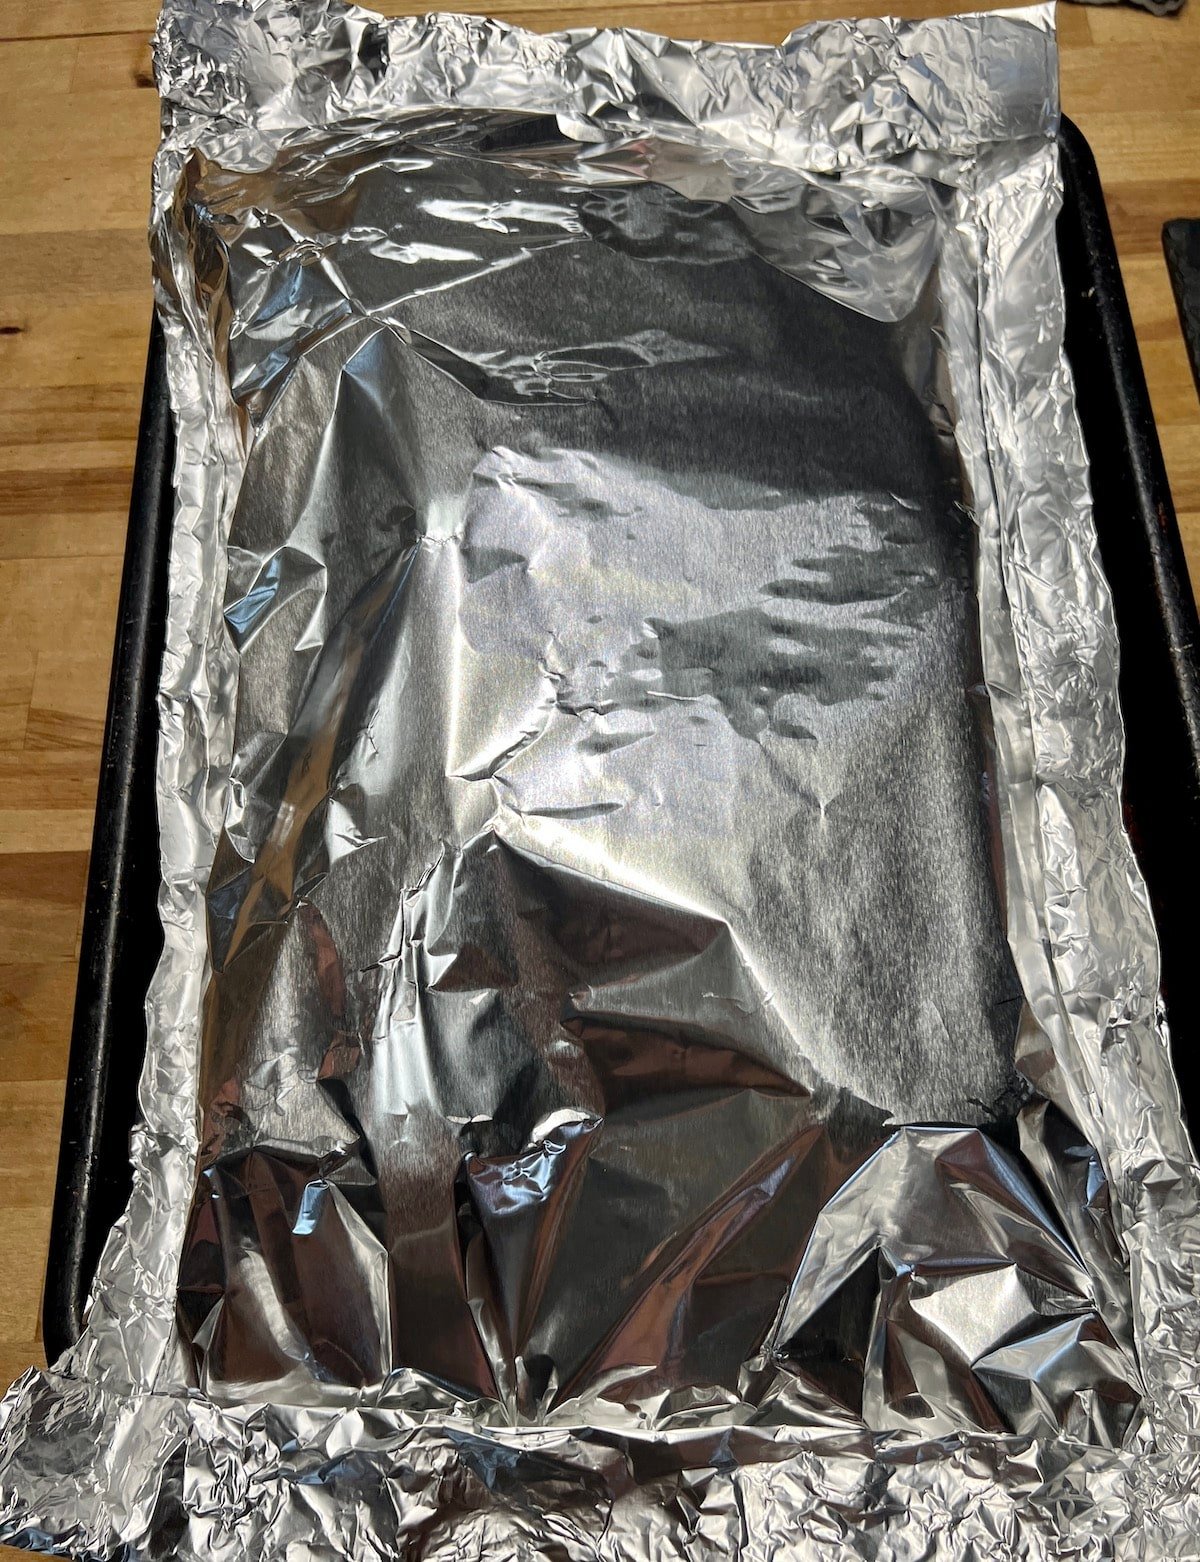 Foil packet of ribs.